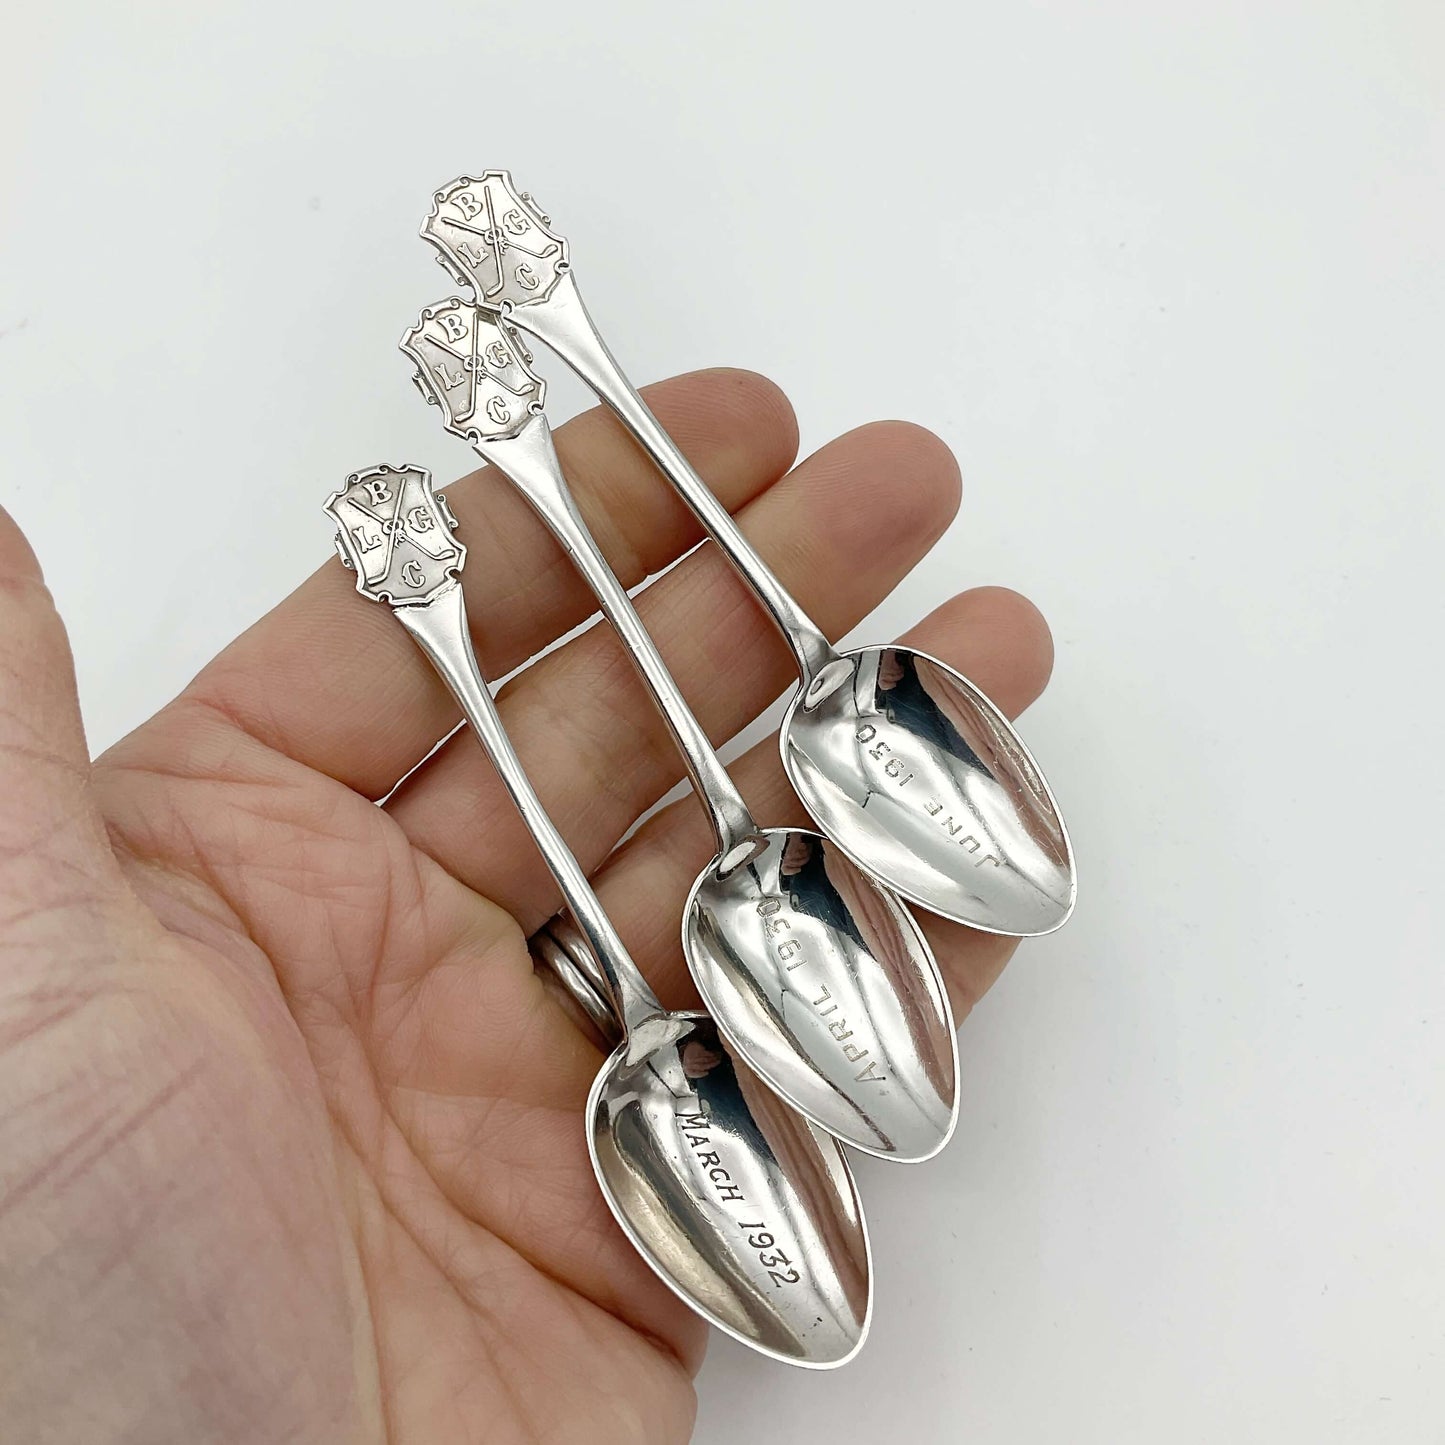 Three coffee spoons in a hand